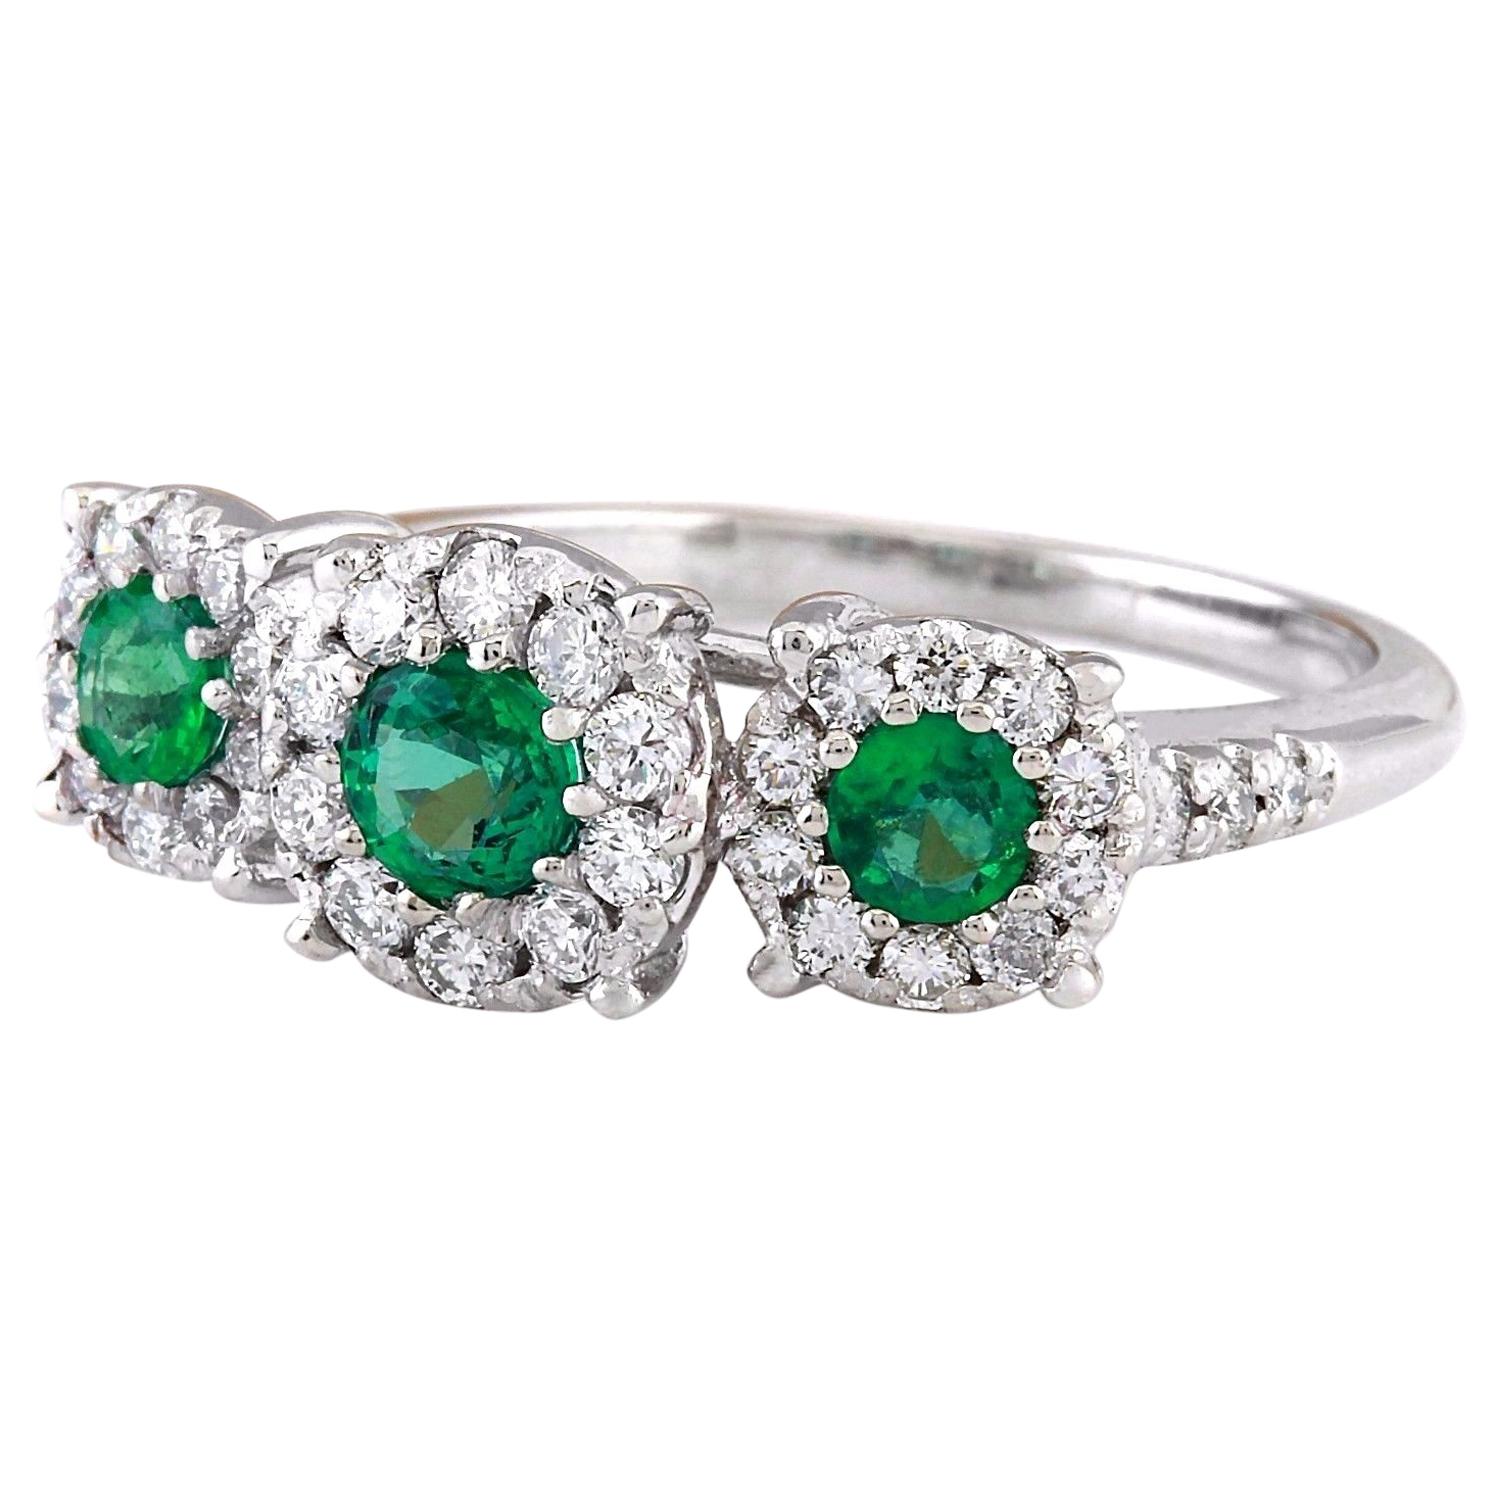 1.70 Carat Natural Emerald 14K Solid White Gold Diamond Ring
 Item Type: Ring
 Item Style: Engagement
 Material: 14K White Gold
 Mainstone: Emerald
 Stone Color: Green
 Stone Weight: 1.00 Carat
 Stone Shape: Round
 Stone Quantity: 3
 Stone